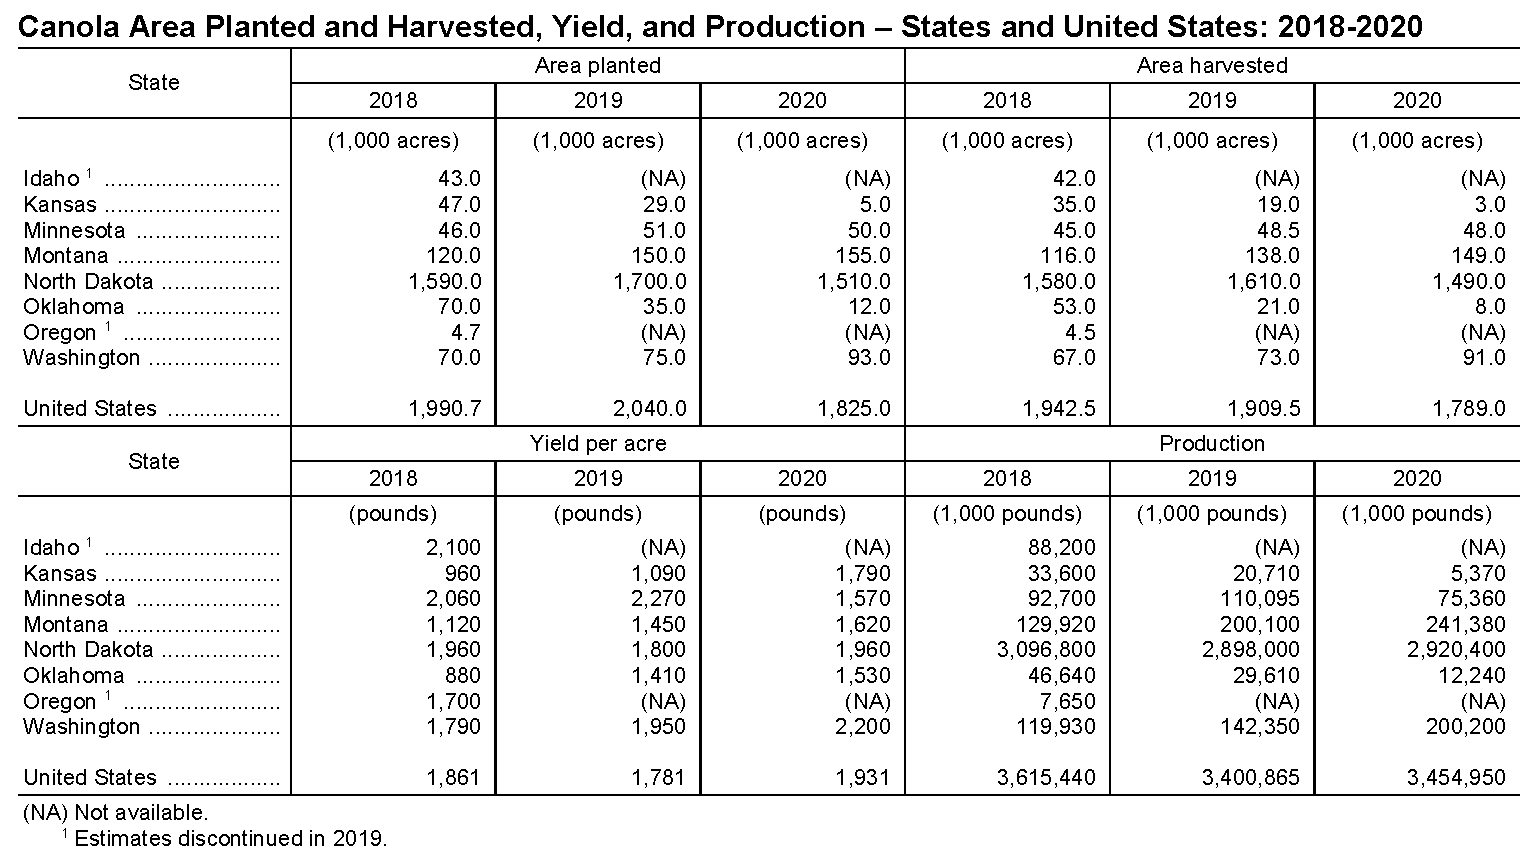 Canola Area Planted and Harvested 2018-20